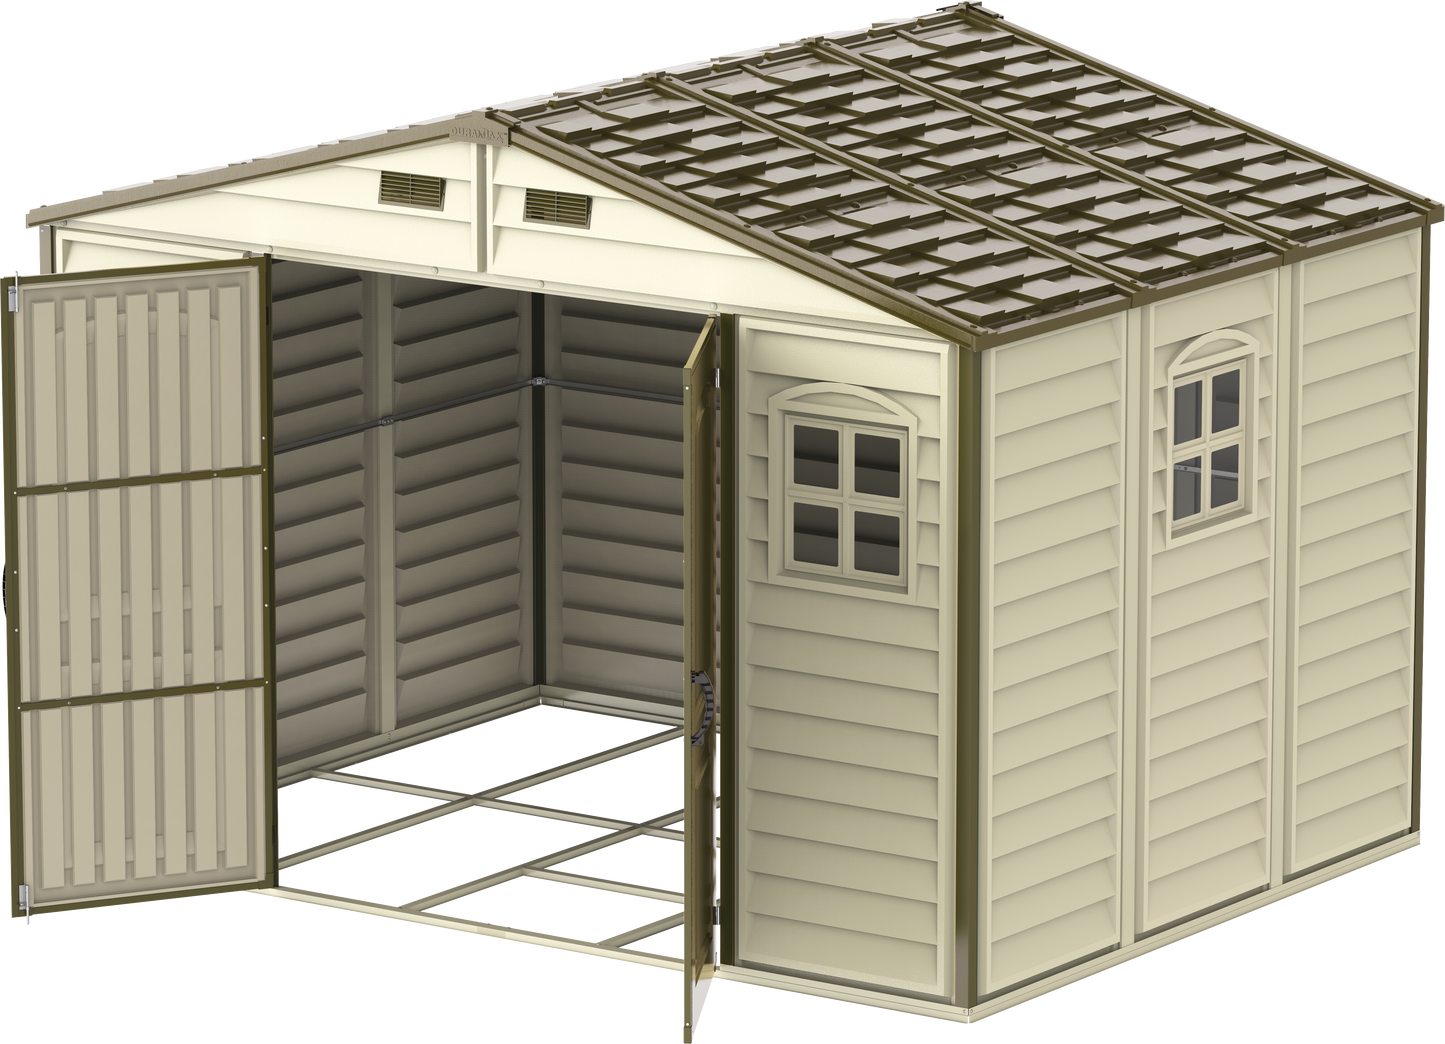 Big plastic storage shed, 3.19 x 2.40 m with metal floor kit for better storage use.